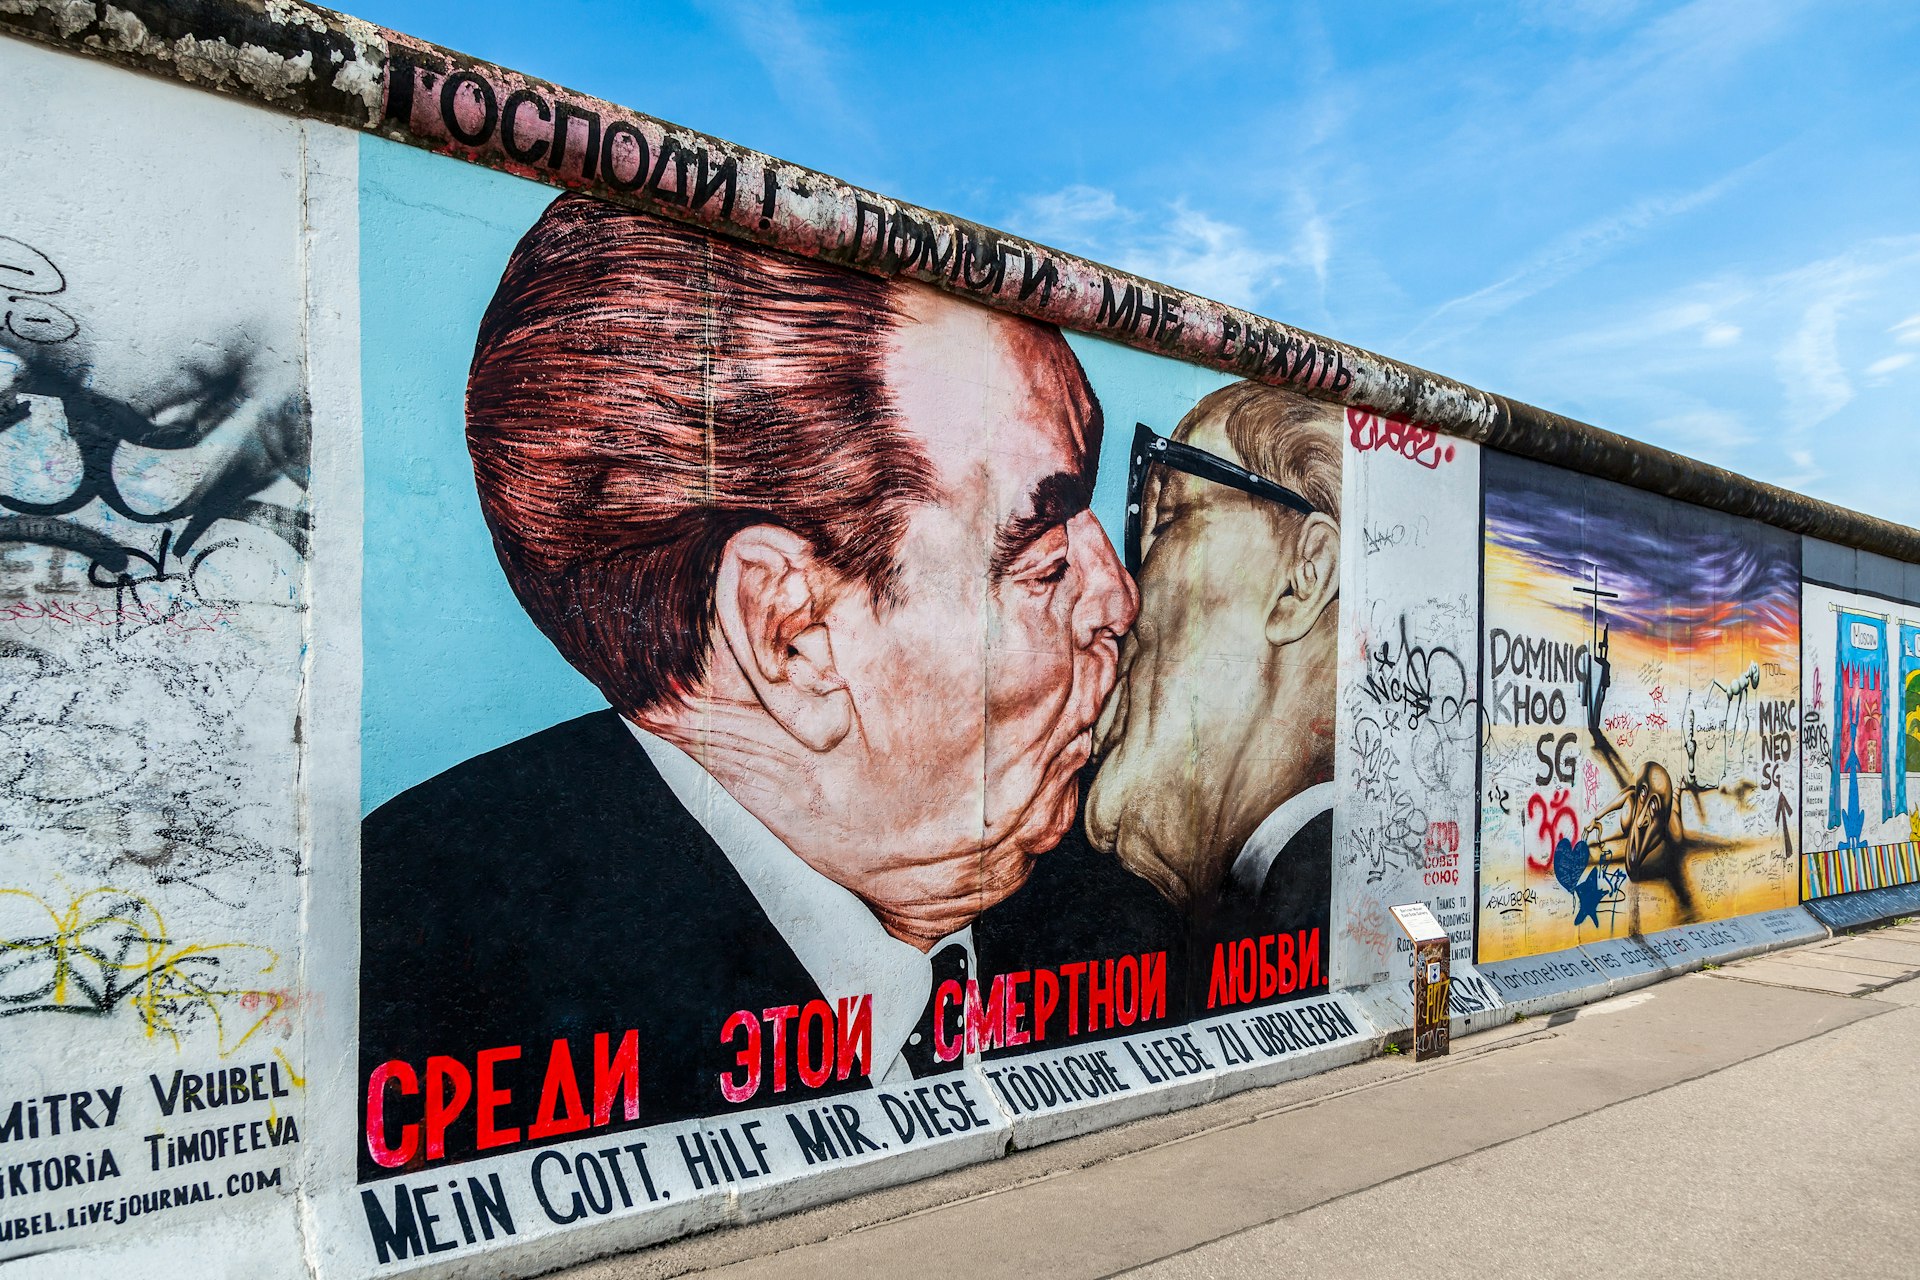  Berlin Wall graffiti (titled My God, Help Me to Survive This Deadly Love) seen on the East Side Gallery featuring Leonid Brezhnev and Erich Honecker kissing. 